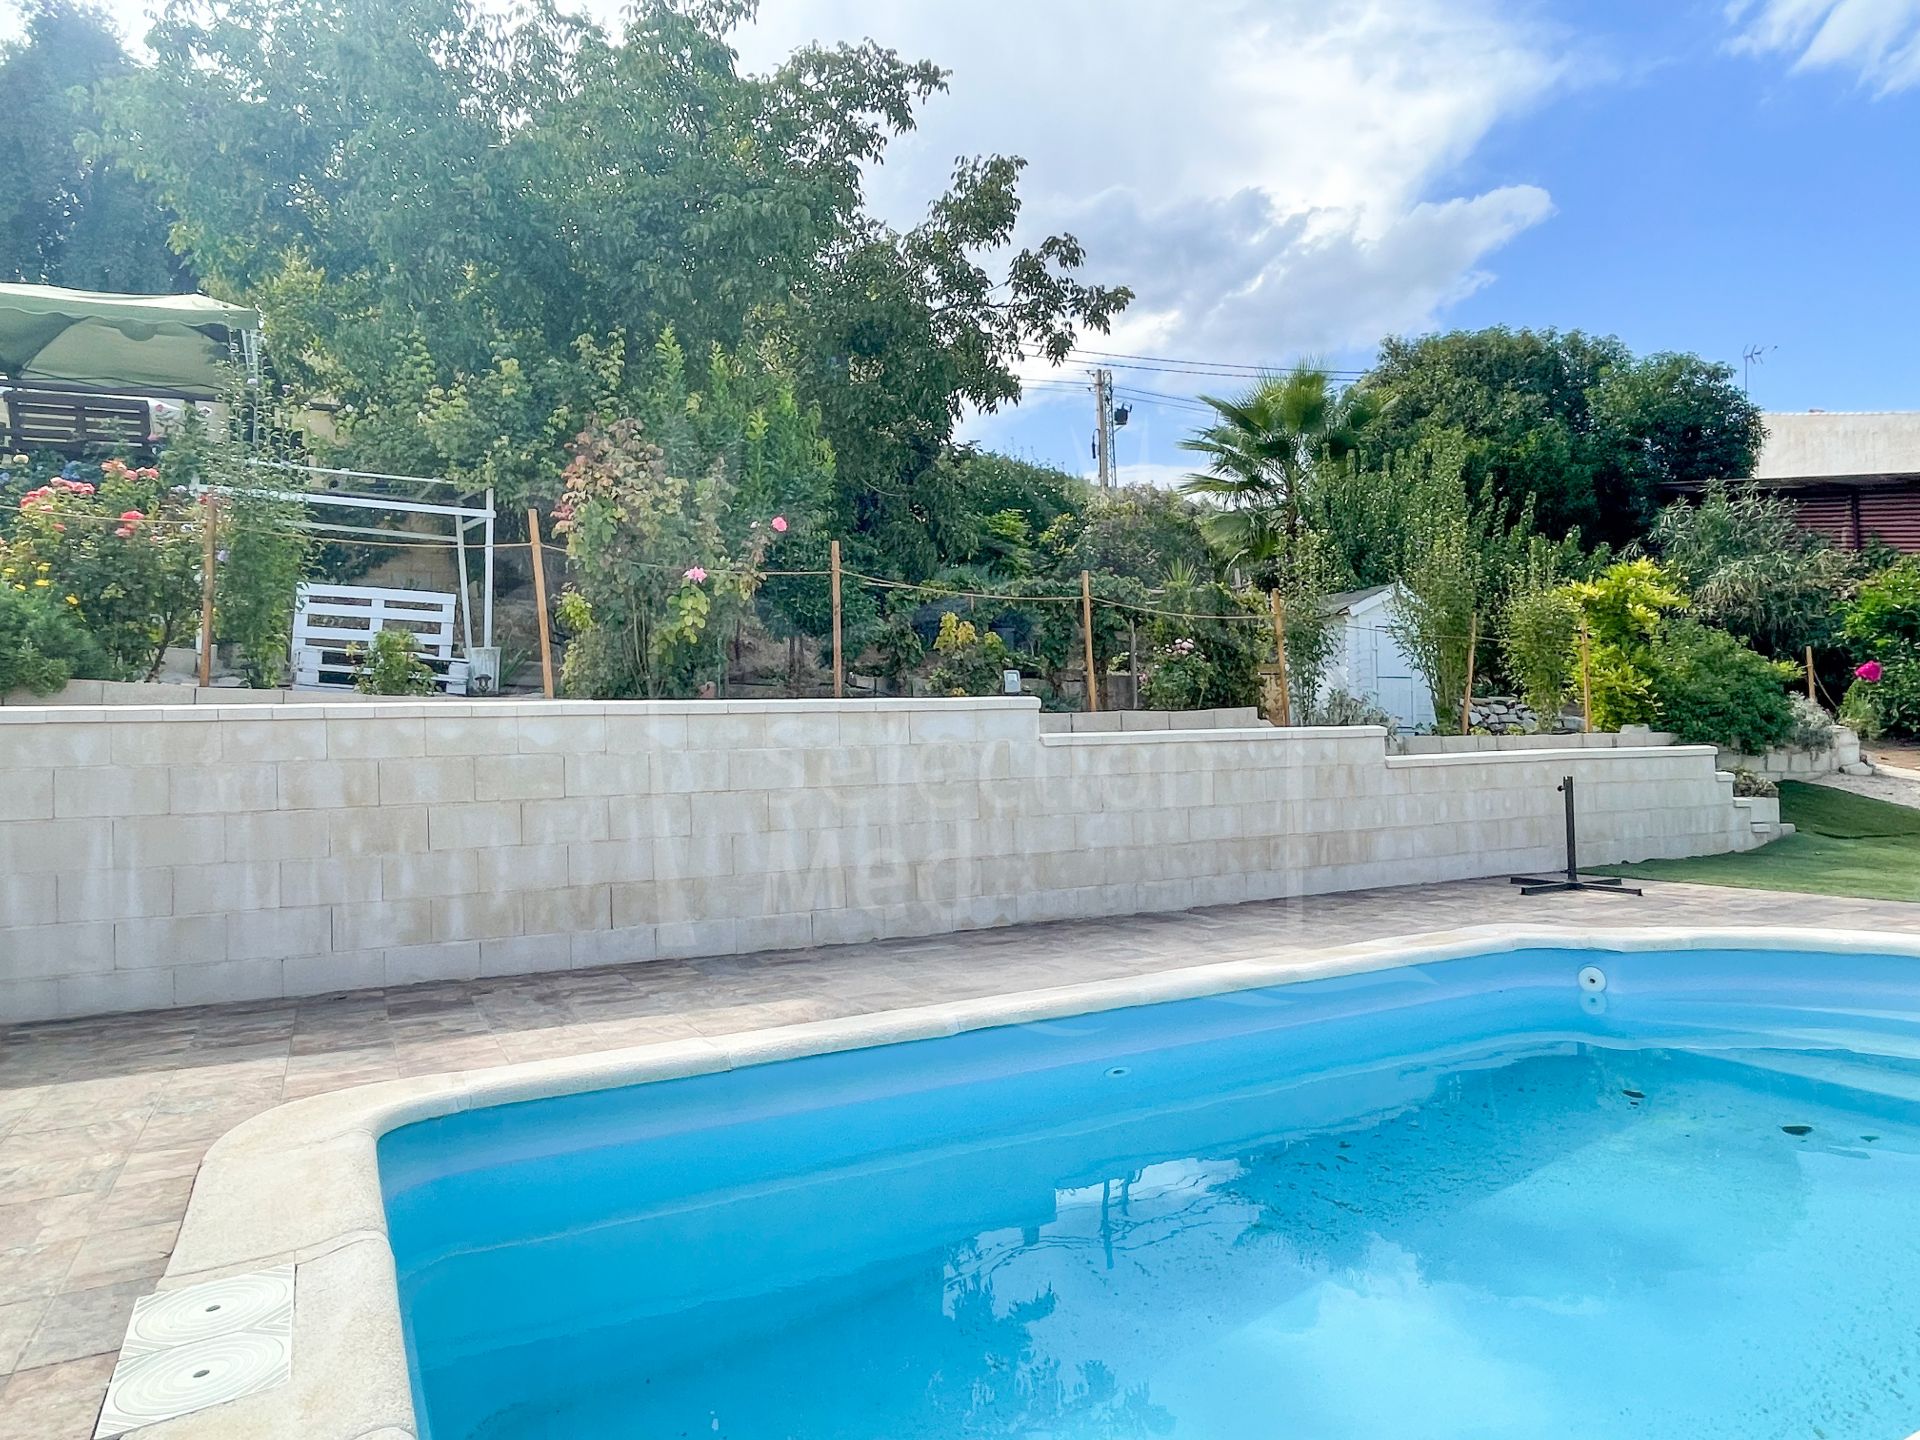 Lovely townhouse with beautiful garden, pool and views